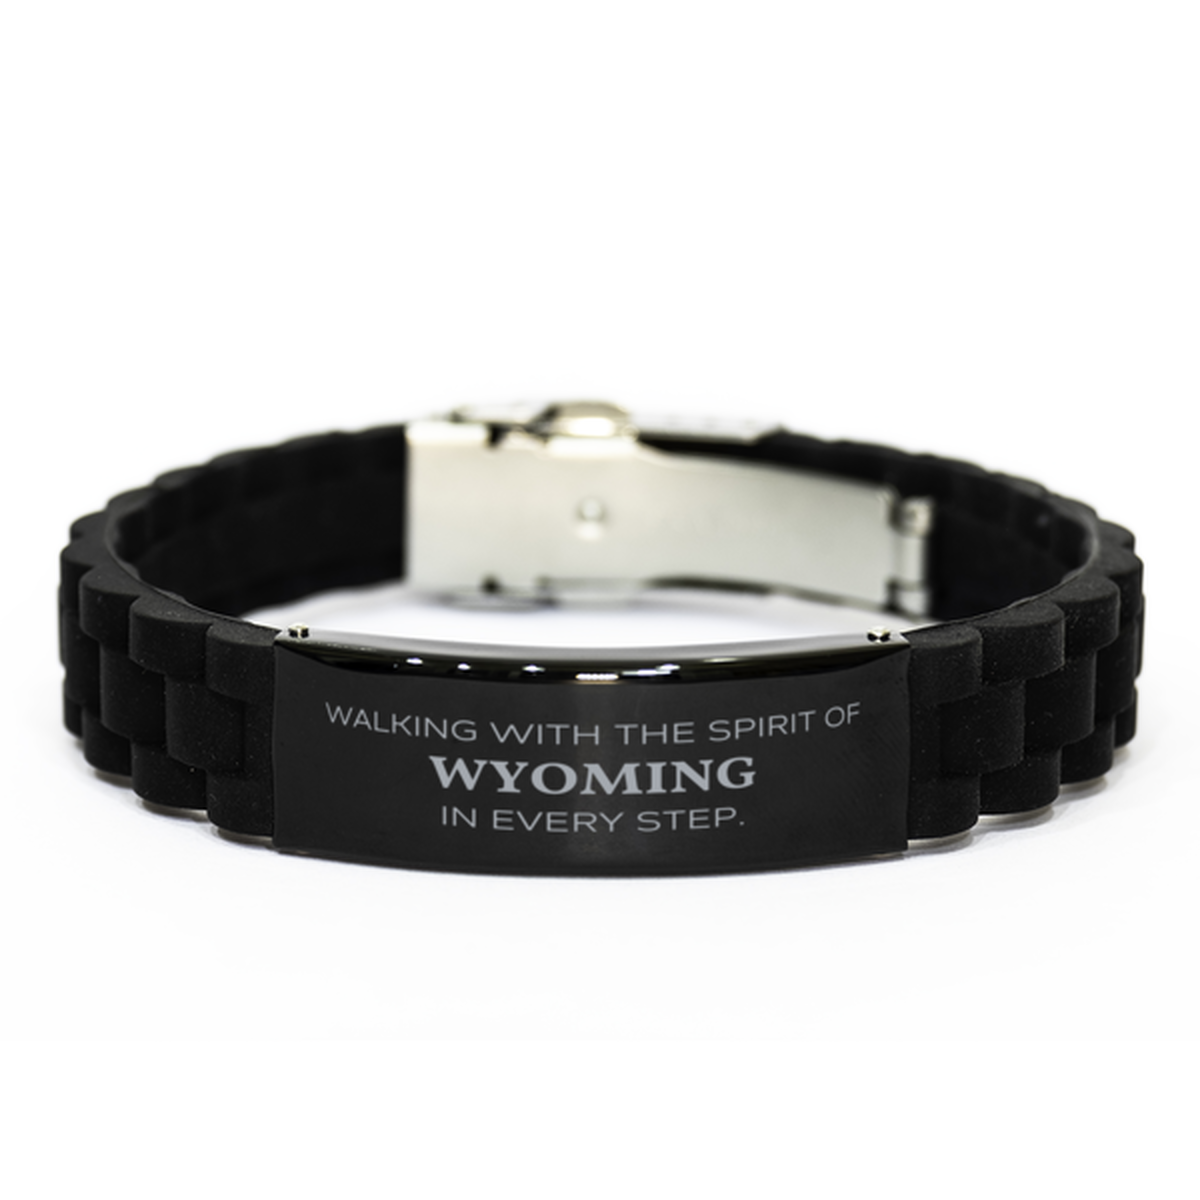 Wyoming Gifts, Walking with the spirit, Love Wyoming Birthday Christmas Black Glidelock Clasp Bracelet For Wyoming People, Men, Women, Friends